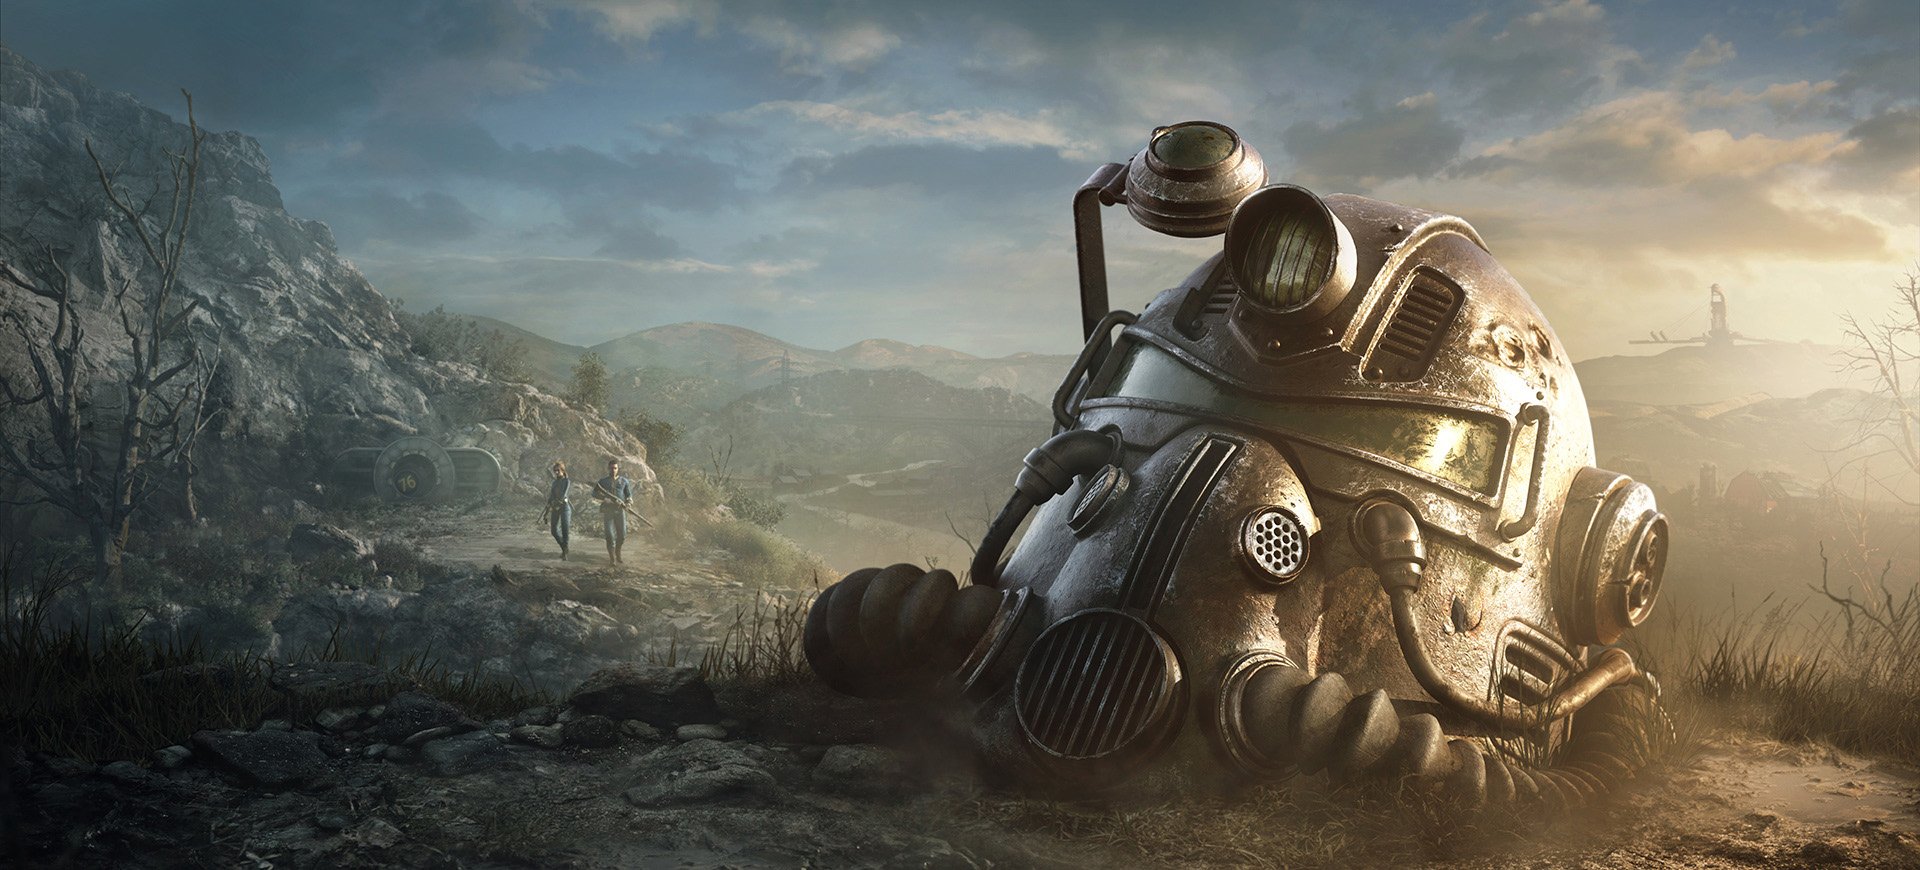 Fallout 76 1.53 Update Patch Notes Arrive